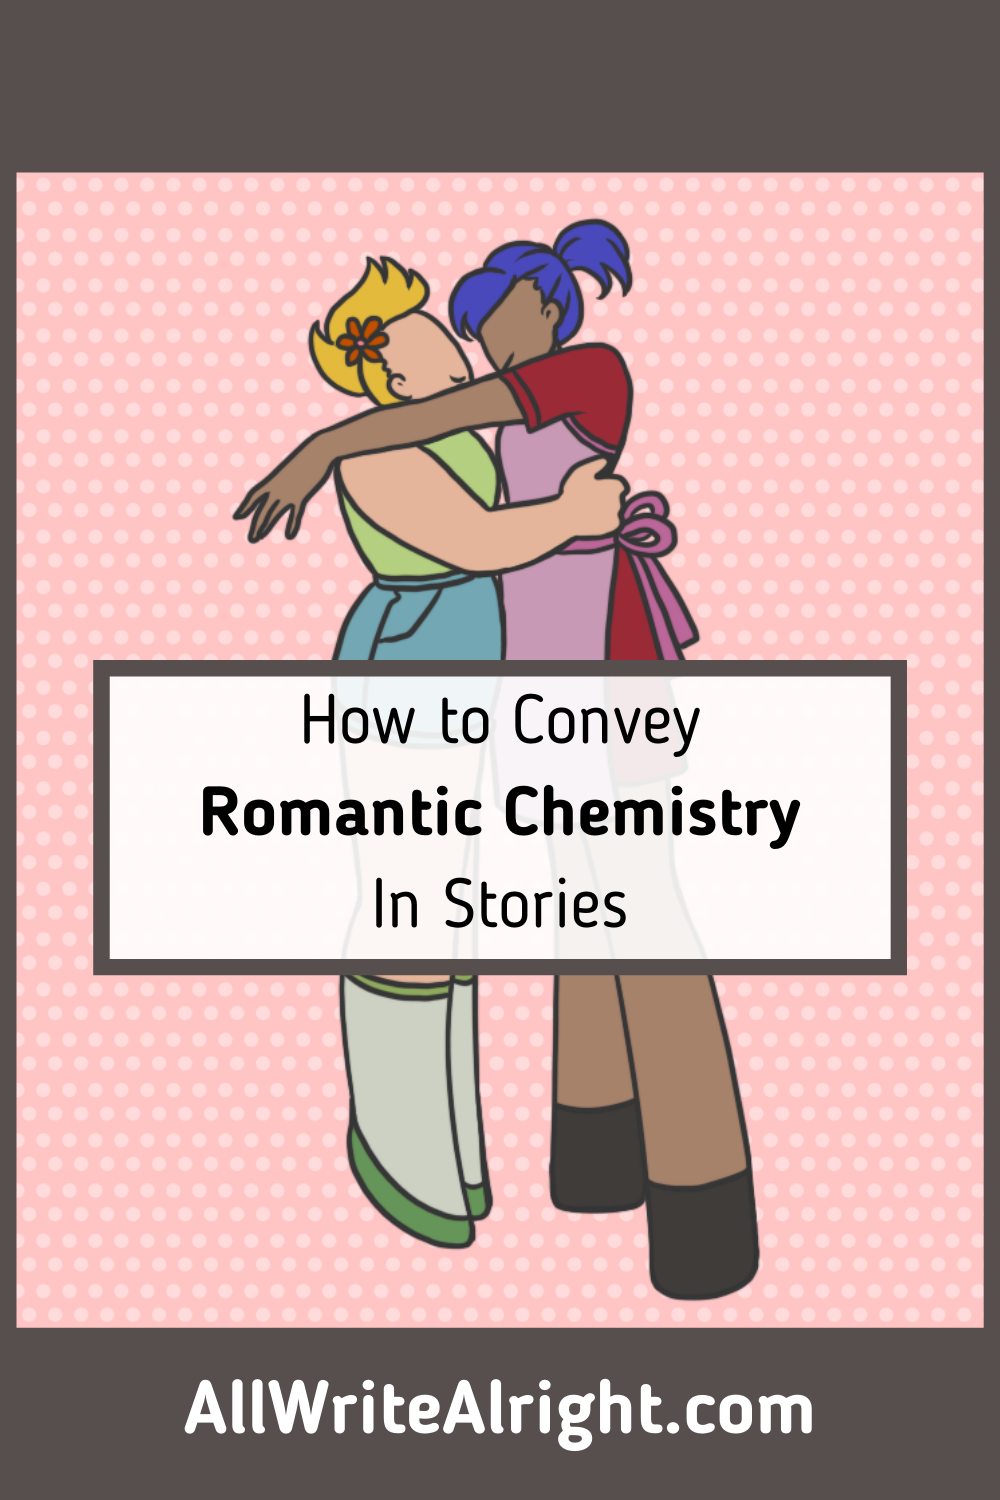 How to Convey Romantic Chemistry in Stories